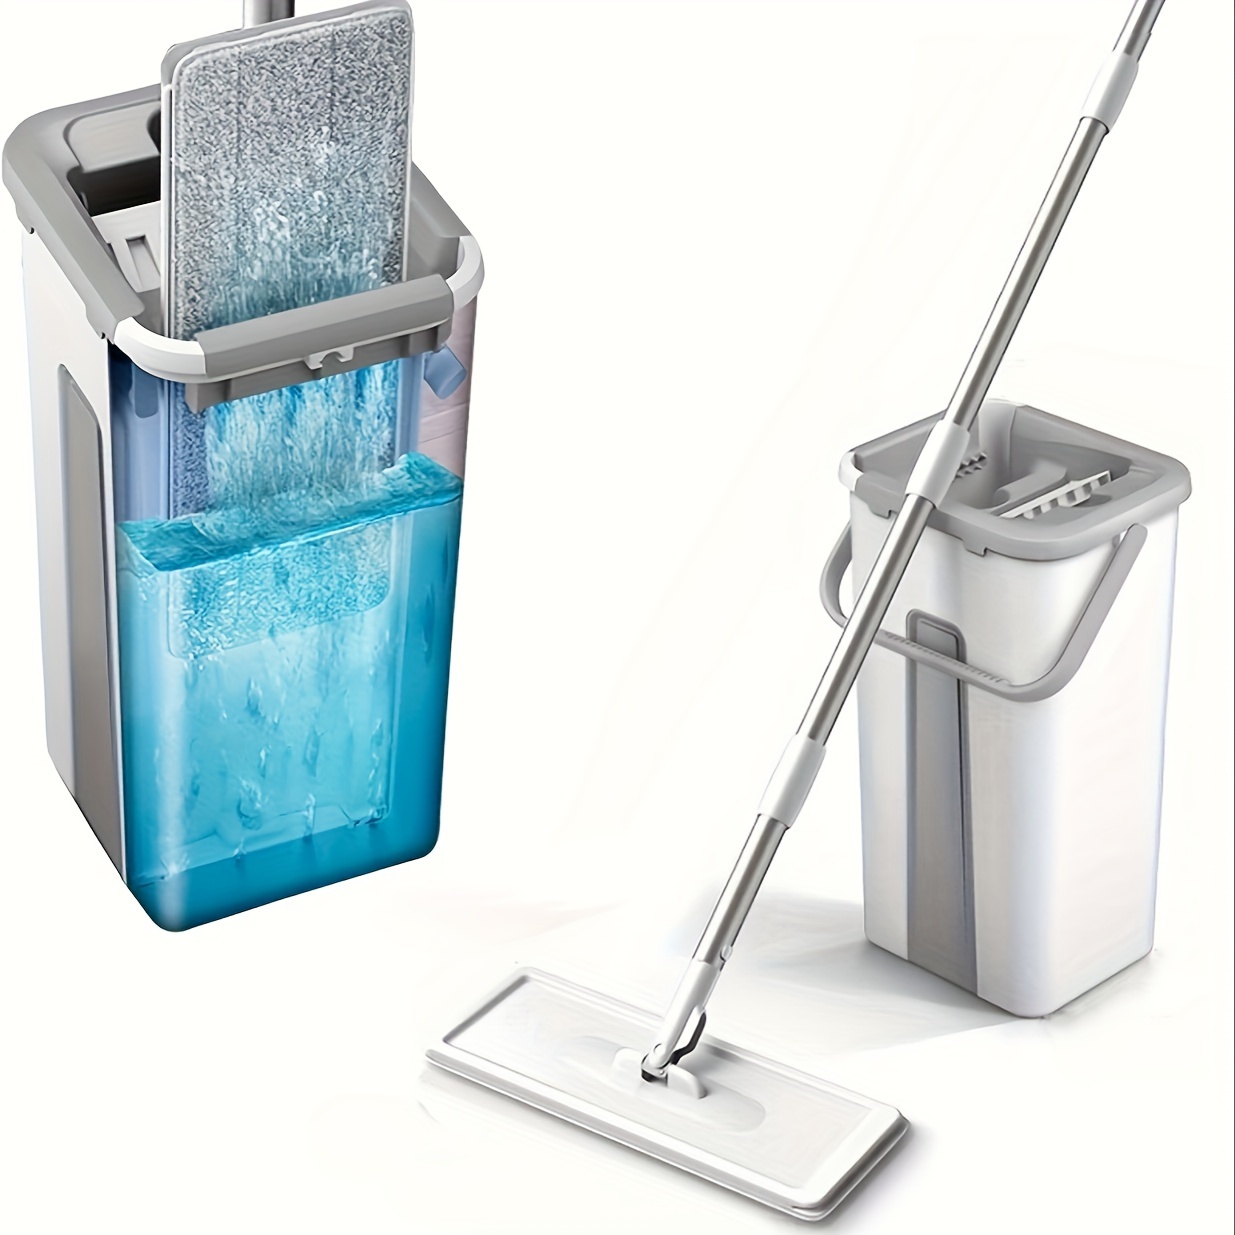 Microfiber Flat Mop with Bucket | Masthome